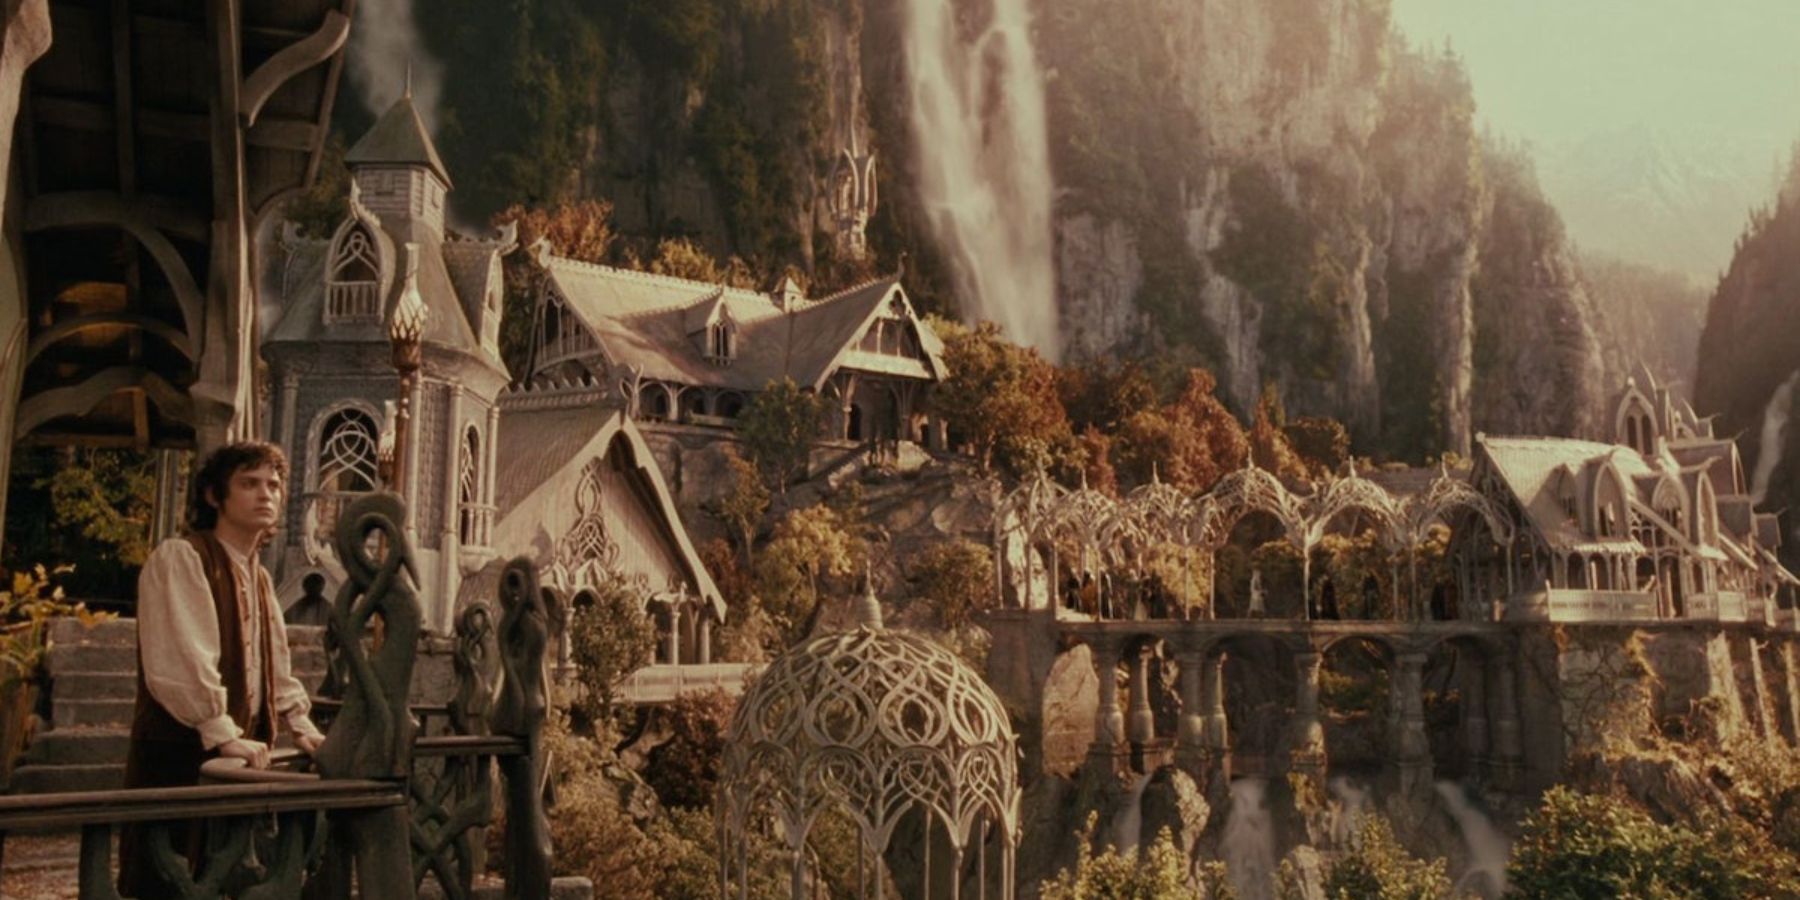 frodo-baggins-rivendell-fellowship-of-the-ring-lotr-feature-1